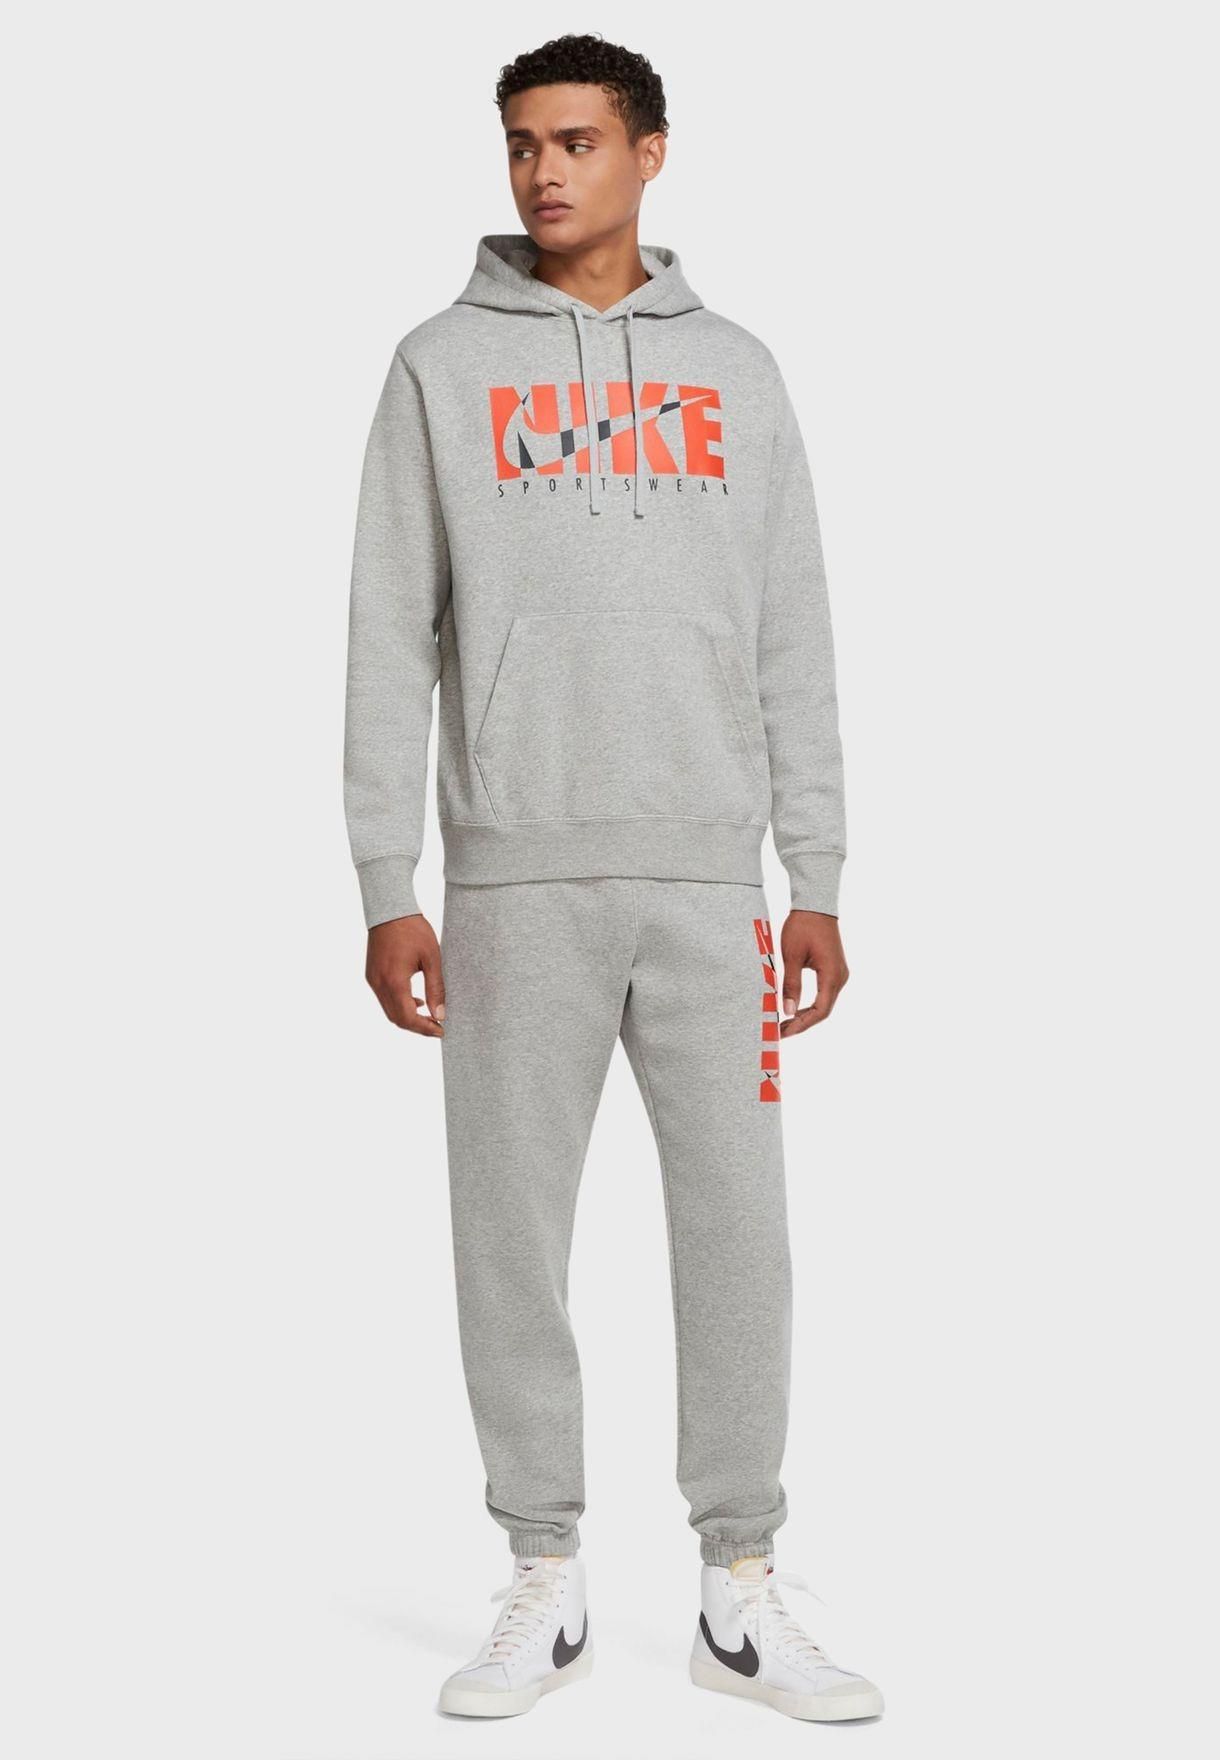 Nike Mens Fleece Hooded Pullover Tracksuit.        
Soft Poly-cotton Blend Light Fleece Fabric.        
Single Pouch Kangaroo Pocket with Dual Side Openings.        
Sweatpants with Elasticised Waist and Hidden Drawstrings.        
Self-Cuffed Hem Joggers.        
Dual Side and Single Wallet Pocket.        
Nike Signature Sportswear Branding Print.